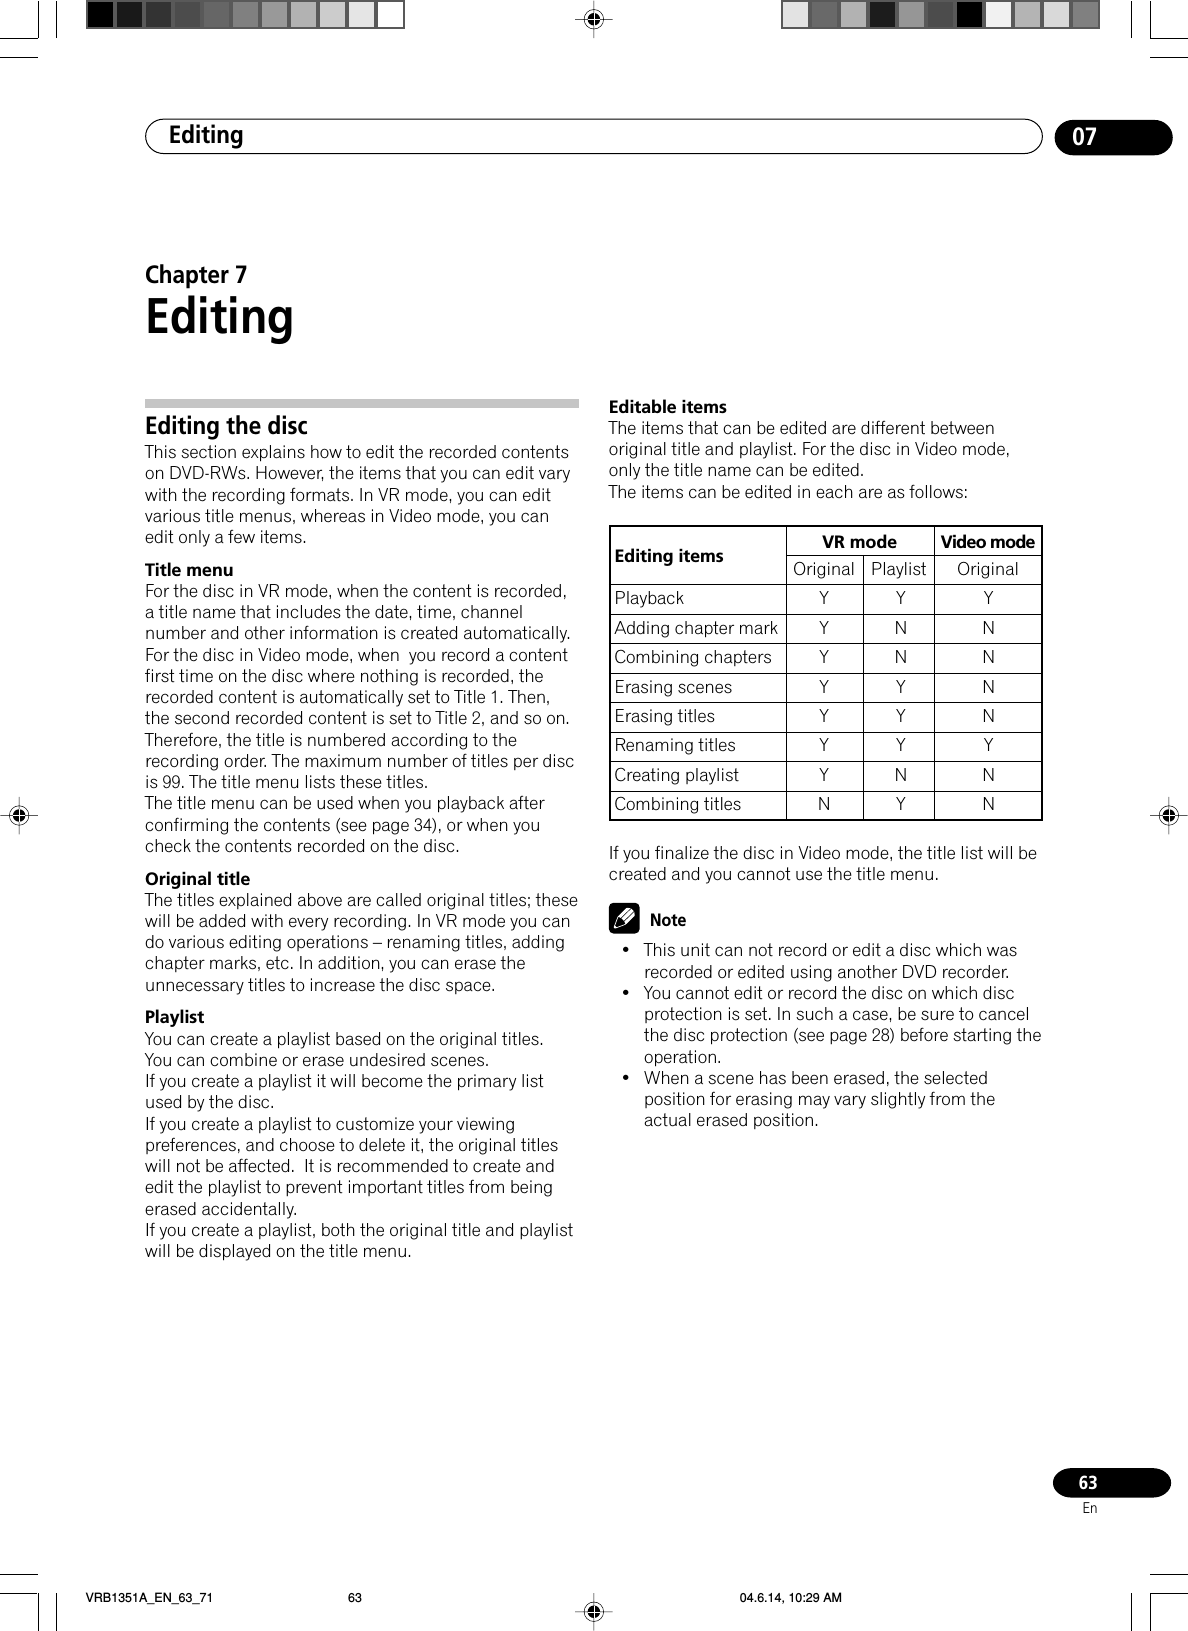 Editing 0763EnEditing the discThis section explains how to edit the recorded contentson DVD-RWs. However, the items that you can edit varywith the recording formats. In VR mode, you can editvarious title menus, whereas in Video mode, you canedit only a few items.Title menuFor the disc in VR mode, when the content is recorded,a title name that includes the date, time, channelnumber and other information is created automatically.For the disc in Video mode, when  you record a contentfirst time on the disc where nothing is recorded, therecorded content is automatically set to Title 1. Then,the second recorded content is set to Title 2, and so on.Therefore, the title is numbered according to therecording order. The maximum number of titles per discis 99. The title menu lists these titles.The title menu can be used when you playback afterconfirming the contents (see page 34), or when youcheck the contents recorded on the disc.Original titleThe titles explained above are called original titles; thesewill be added with every recording. In VR mode you cando various editing operations – renaming titles, addingchapter marks, etc. In addition, you can erase theunnecessary titles to increase the disc space.PlaylistYou can create a playlist based on the original titles.You can combine or erase undesired scenes.If you create a playlist it will become the primary listused by the disc.If you create a playlist to customize your viewingpreferences, and choose to delete it, the original titleswill not be affected.  It is recommended to create andedit the playlist to prevent important titles from beingerased accidentally.If you create a playlist, both the original title and playlistwill be displayed on the title menu.Editable itemsThe items that can be edited are different betweenoriginal title and playlist. For the disc in Video mode,only the title name can be edited.The items can be edited in each are as follows:If you finalize the disc in Video mode, the title list will becreated and you cannot use the title menu.Note• This unit can not record or edit a disc which wasrecorded or edited using another DVD recorder.• You cannot edit or record the disc on which discprotection is set. In such a case, be sure to cancelthe disc protection (see page 28) before starting theoperation.• When a scene has been erased, the selectedposition for erasing may vary slightly from theactual erased position.Chapter 7EditingEditing items VR modePlaybackAdding chapter markCombining chaptersErasing scenesErasing titlesRenaming titlesCreating playlistCombining titlesOriginal PlaylistYYYYYYYNYNNYYYNYYNNNNYNNVideo modeOriginalVRB1351A_EN_63_71 04.6.14, 10:29 AM63